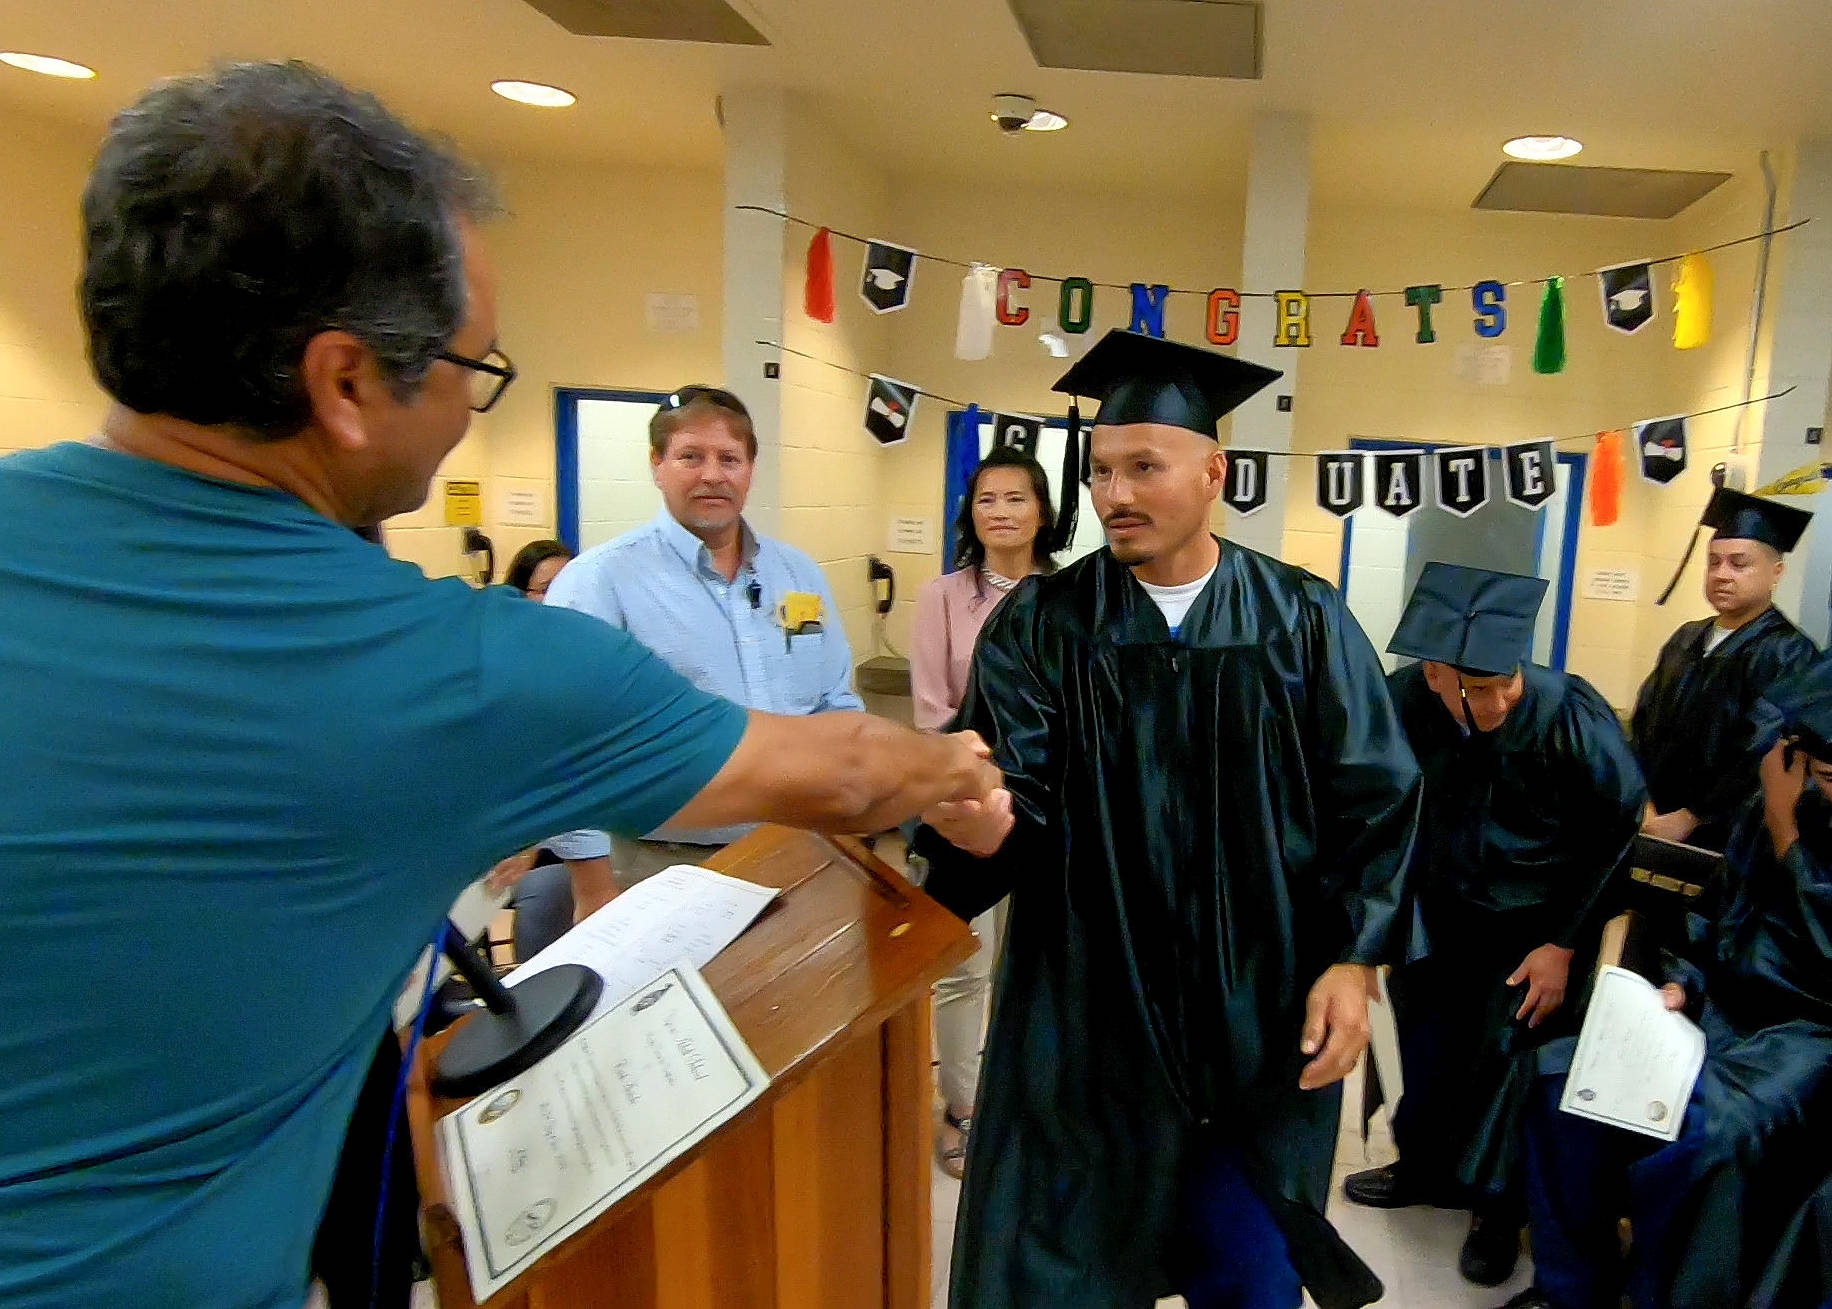 Graduations at COR for students earning college degrees and high school equivalency diplomas. Here a man shakes the hand of an incarcerated person wearing a cap and gown.